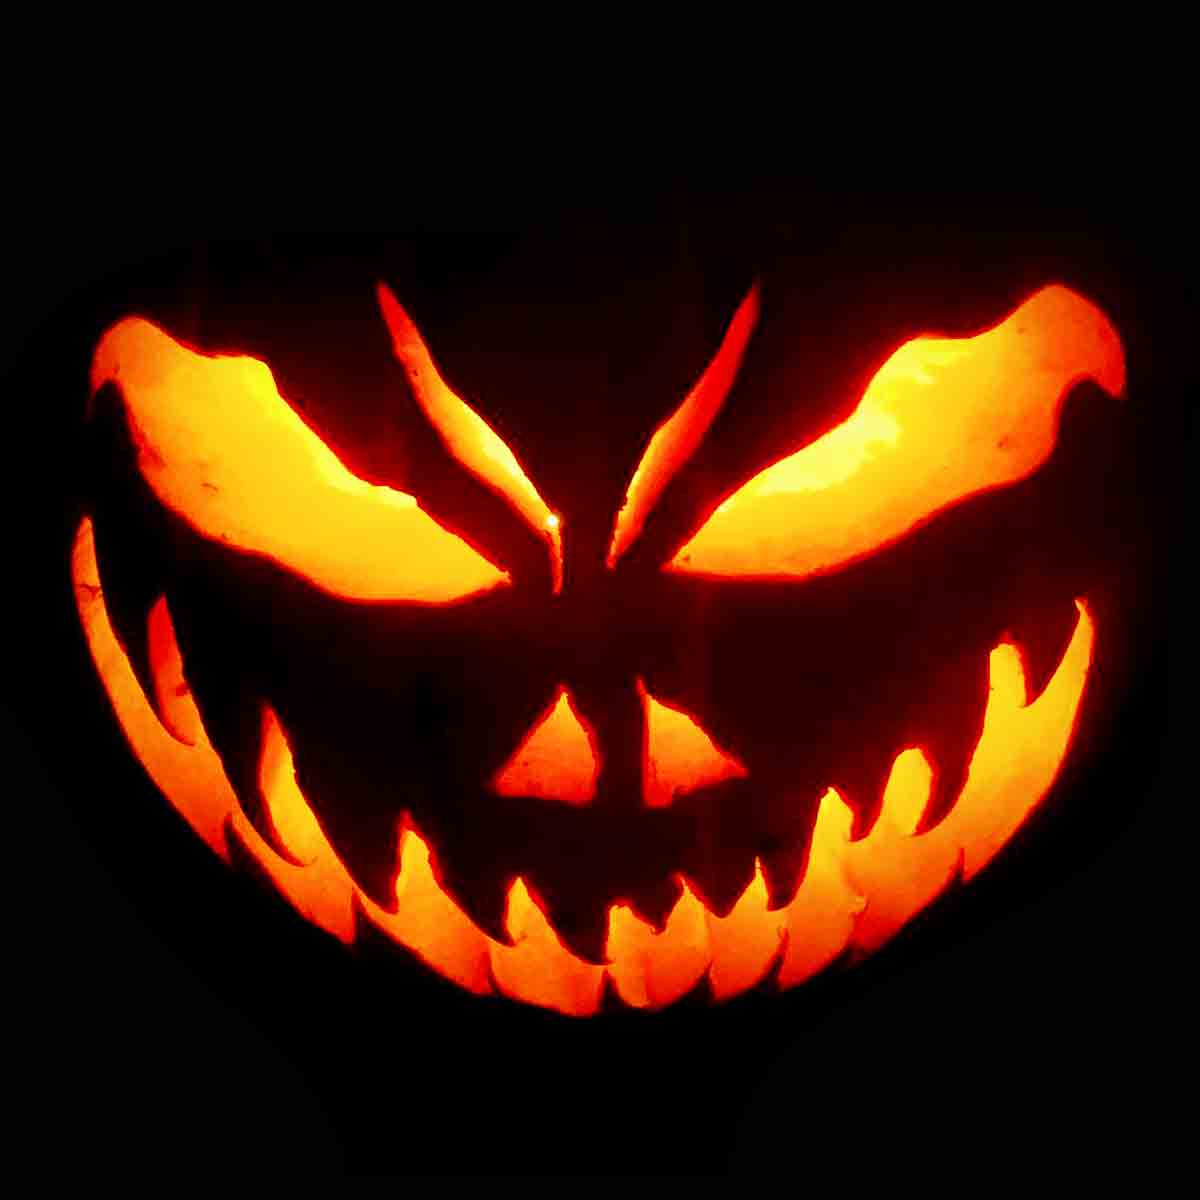 Best Printable Scary Halloween Faces Pumpkin Carving Templates | The ...